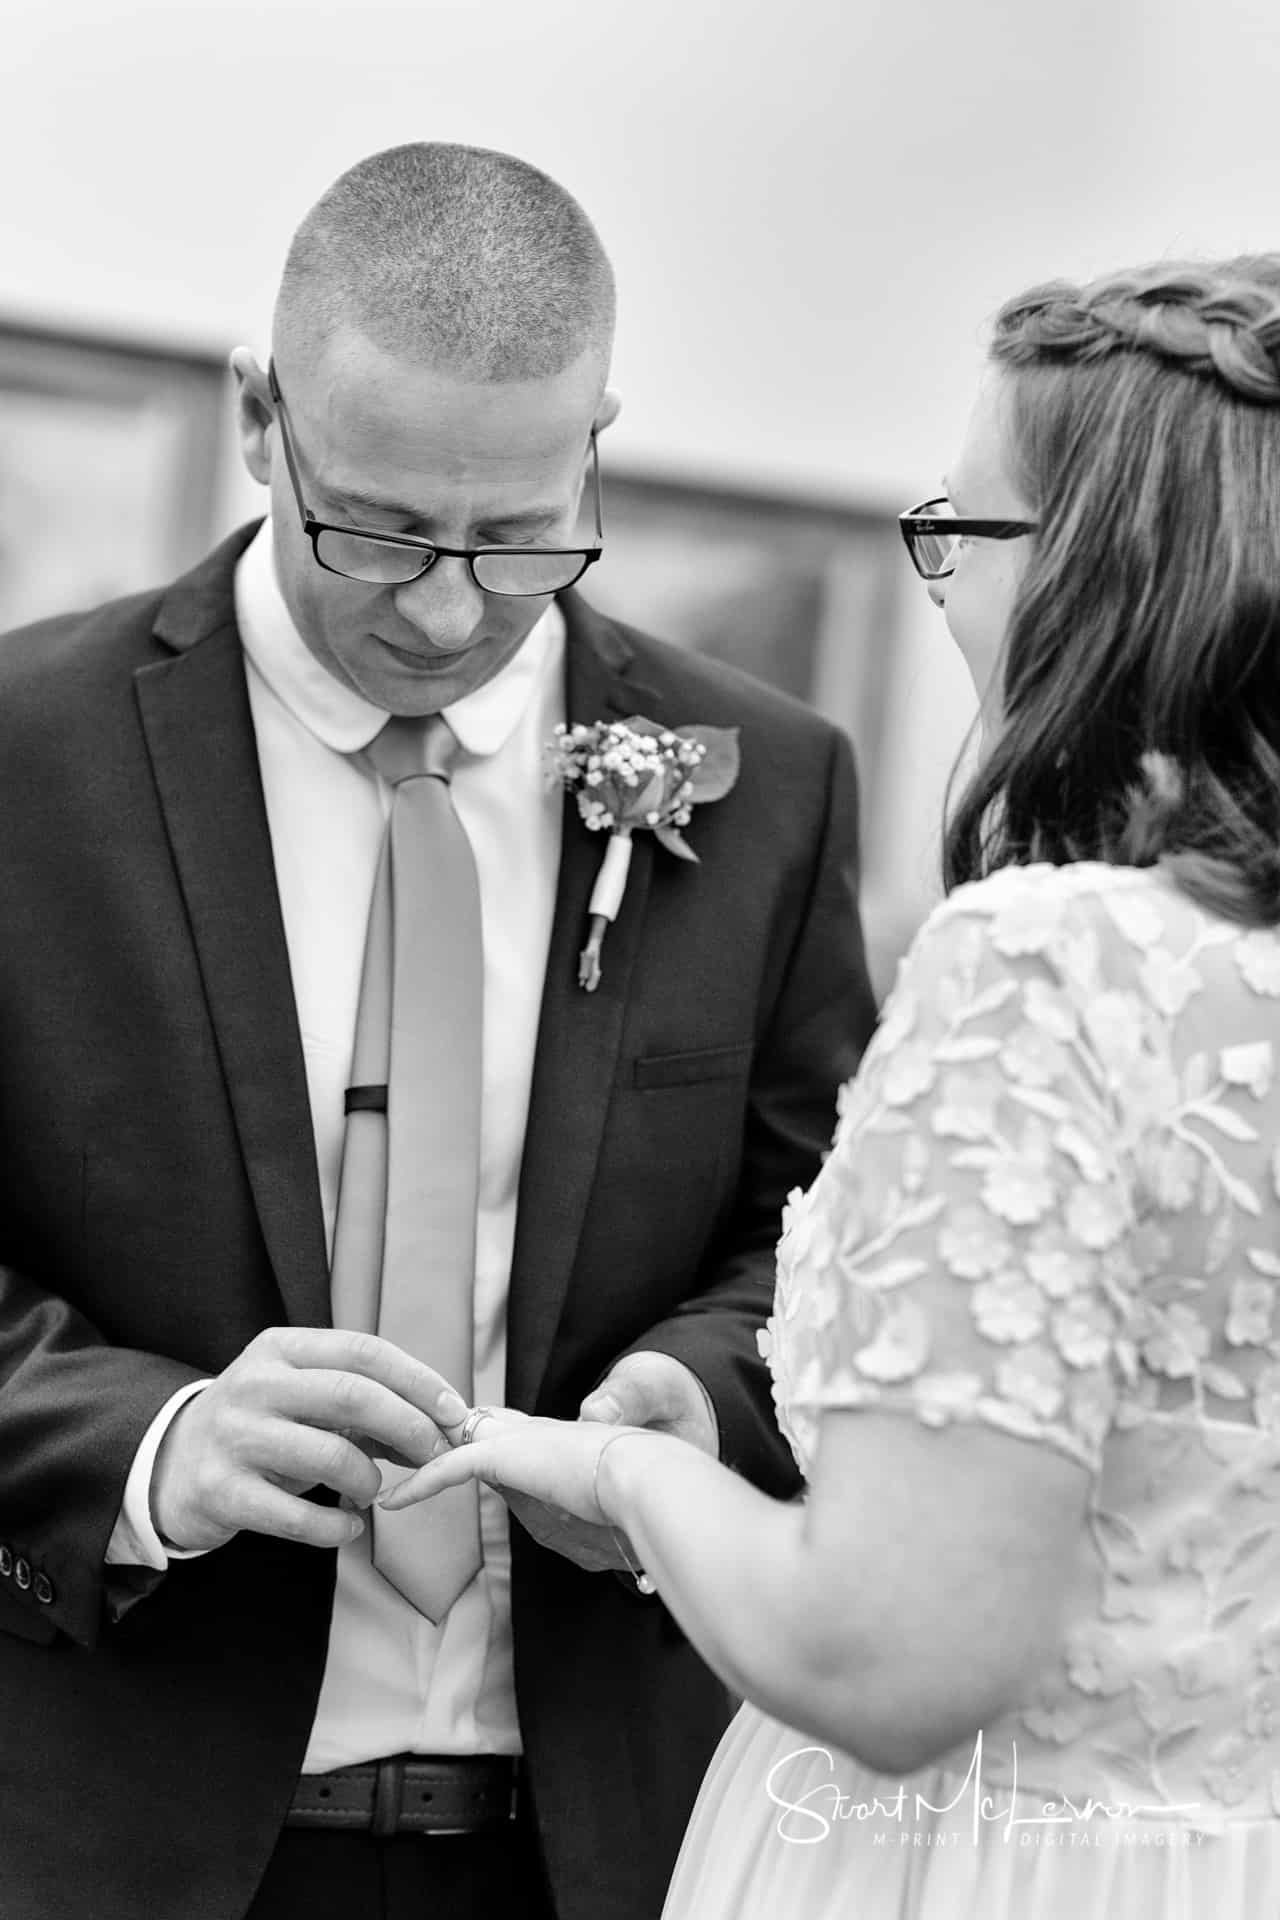 Dukinfield Town Hall Wedding Photography by Stuart McLernon | M-PRINT Digital Imagery